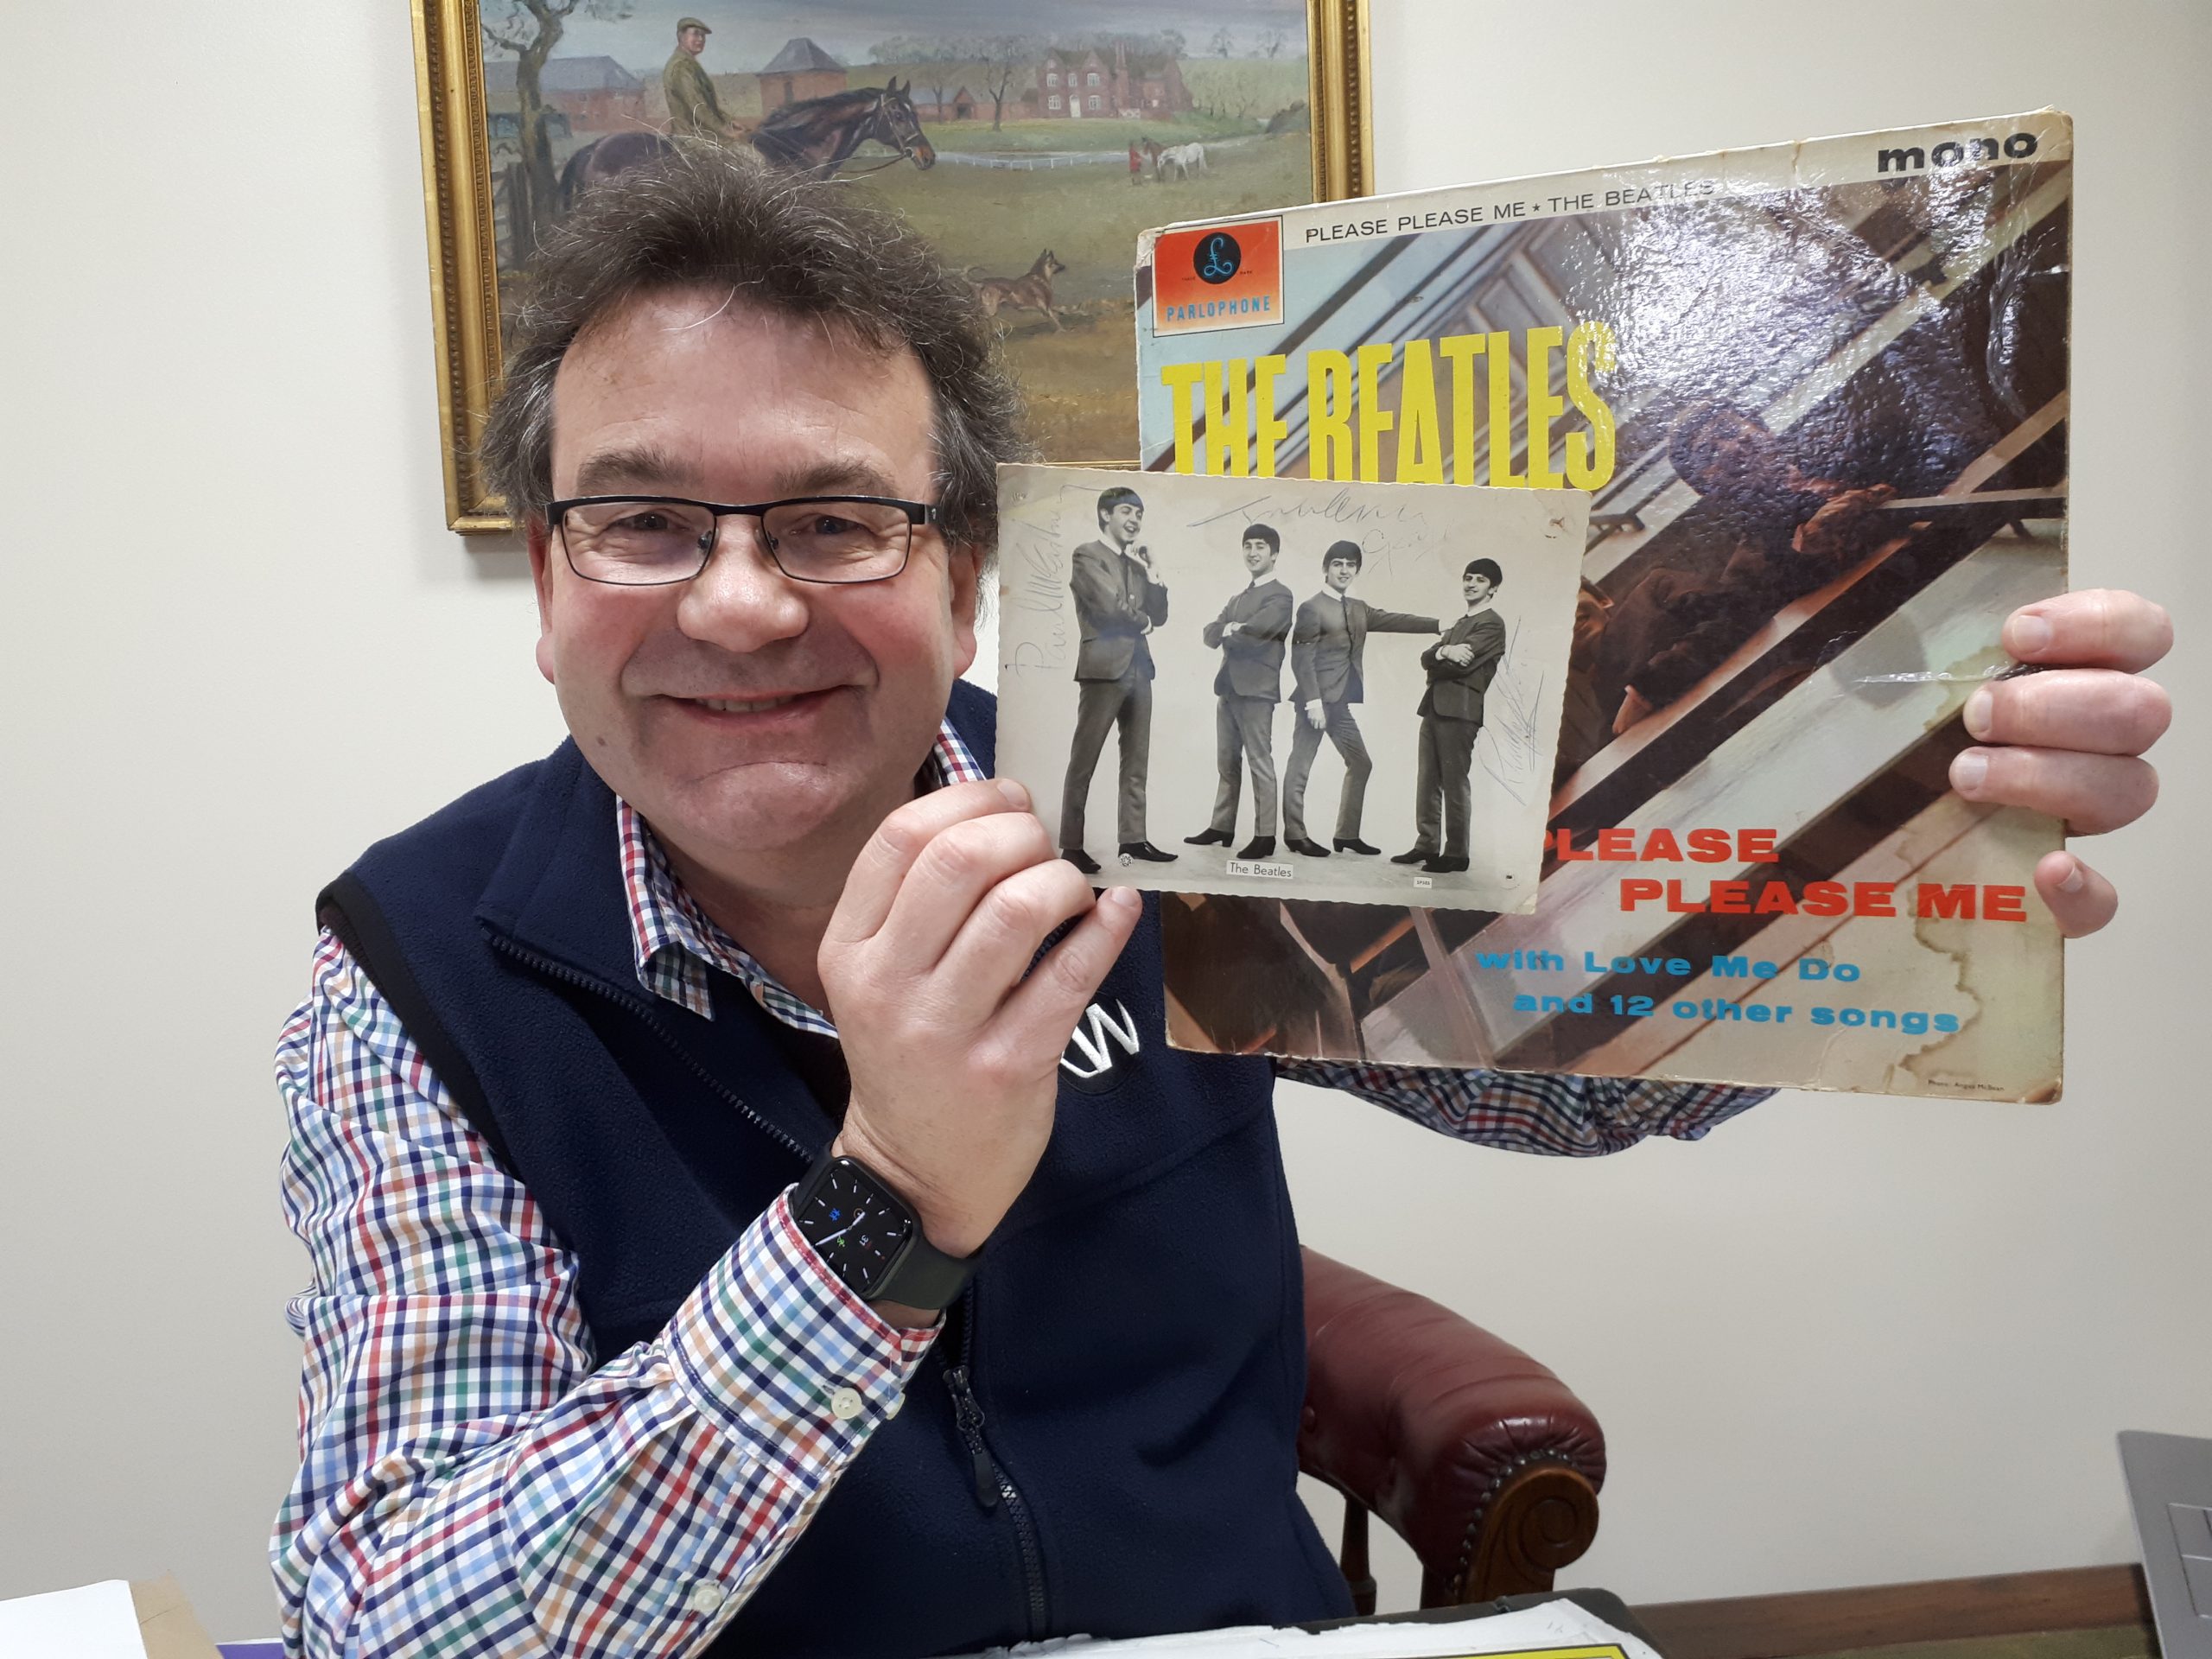 Auctioneer Richard Winterton with the rare autographed photo and a copy of The Beatles’ first LP Please Please Me.